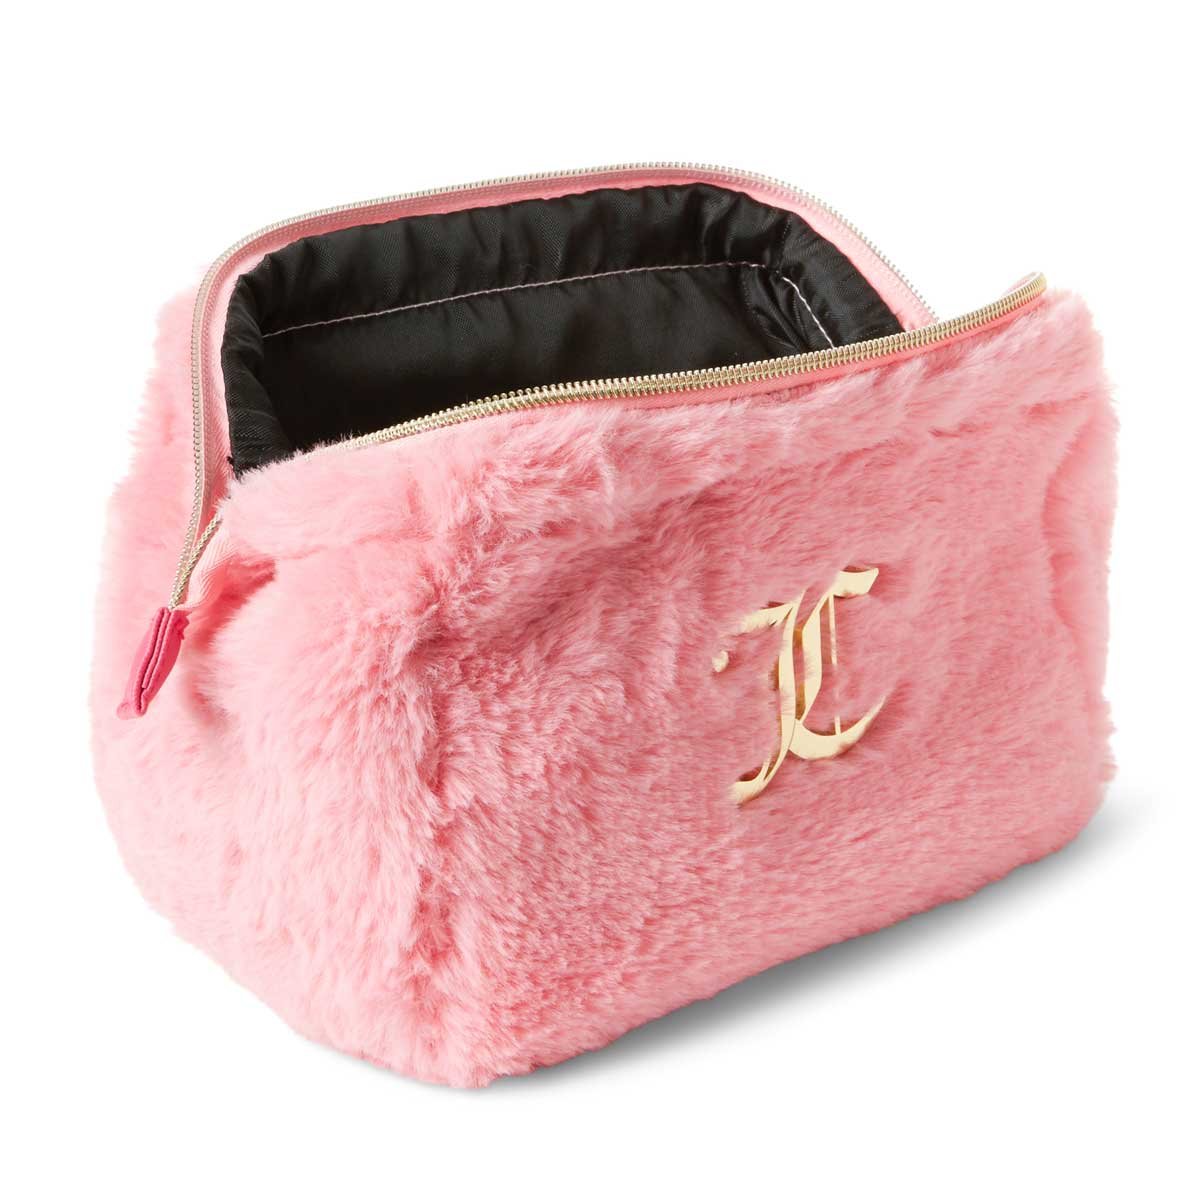 Cosmetiquera Pvc Juicy Couture